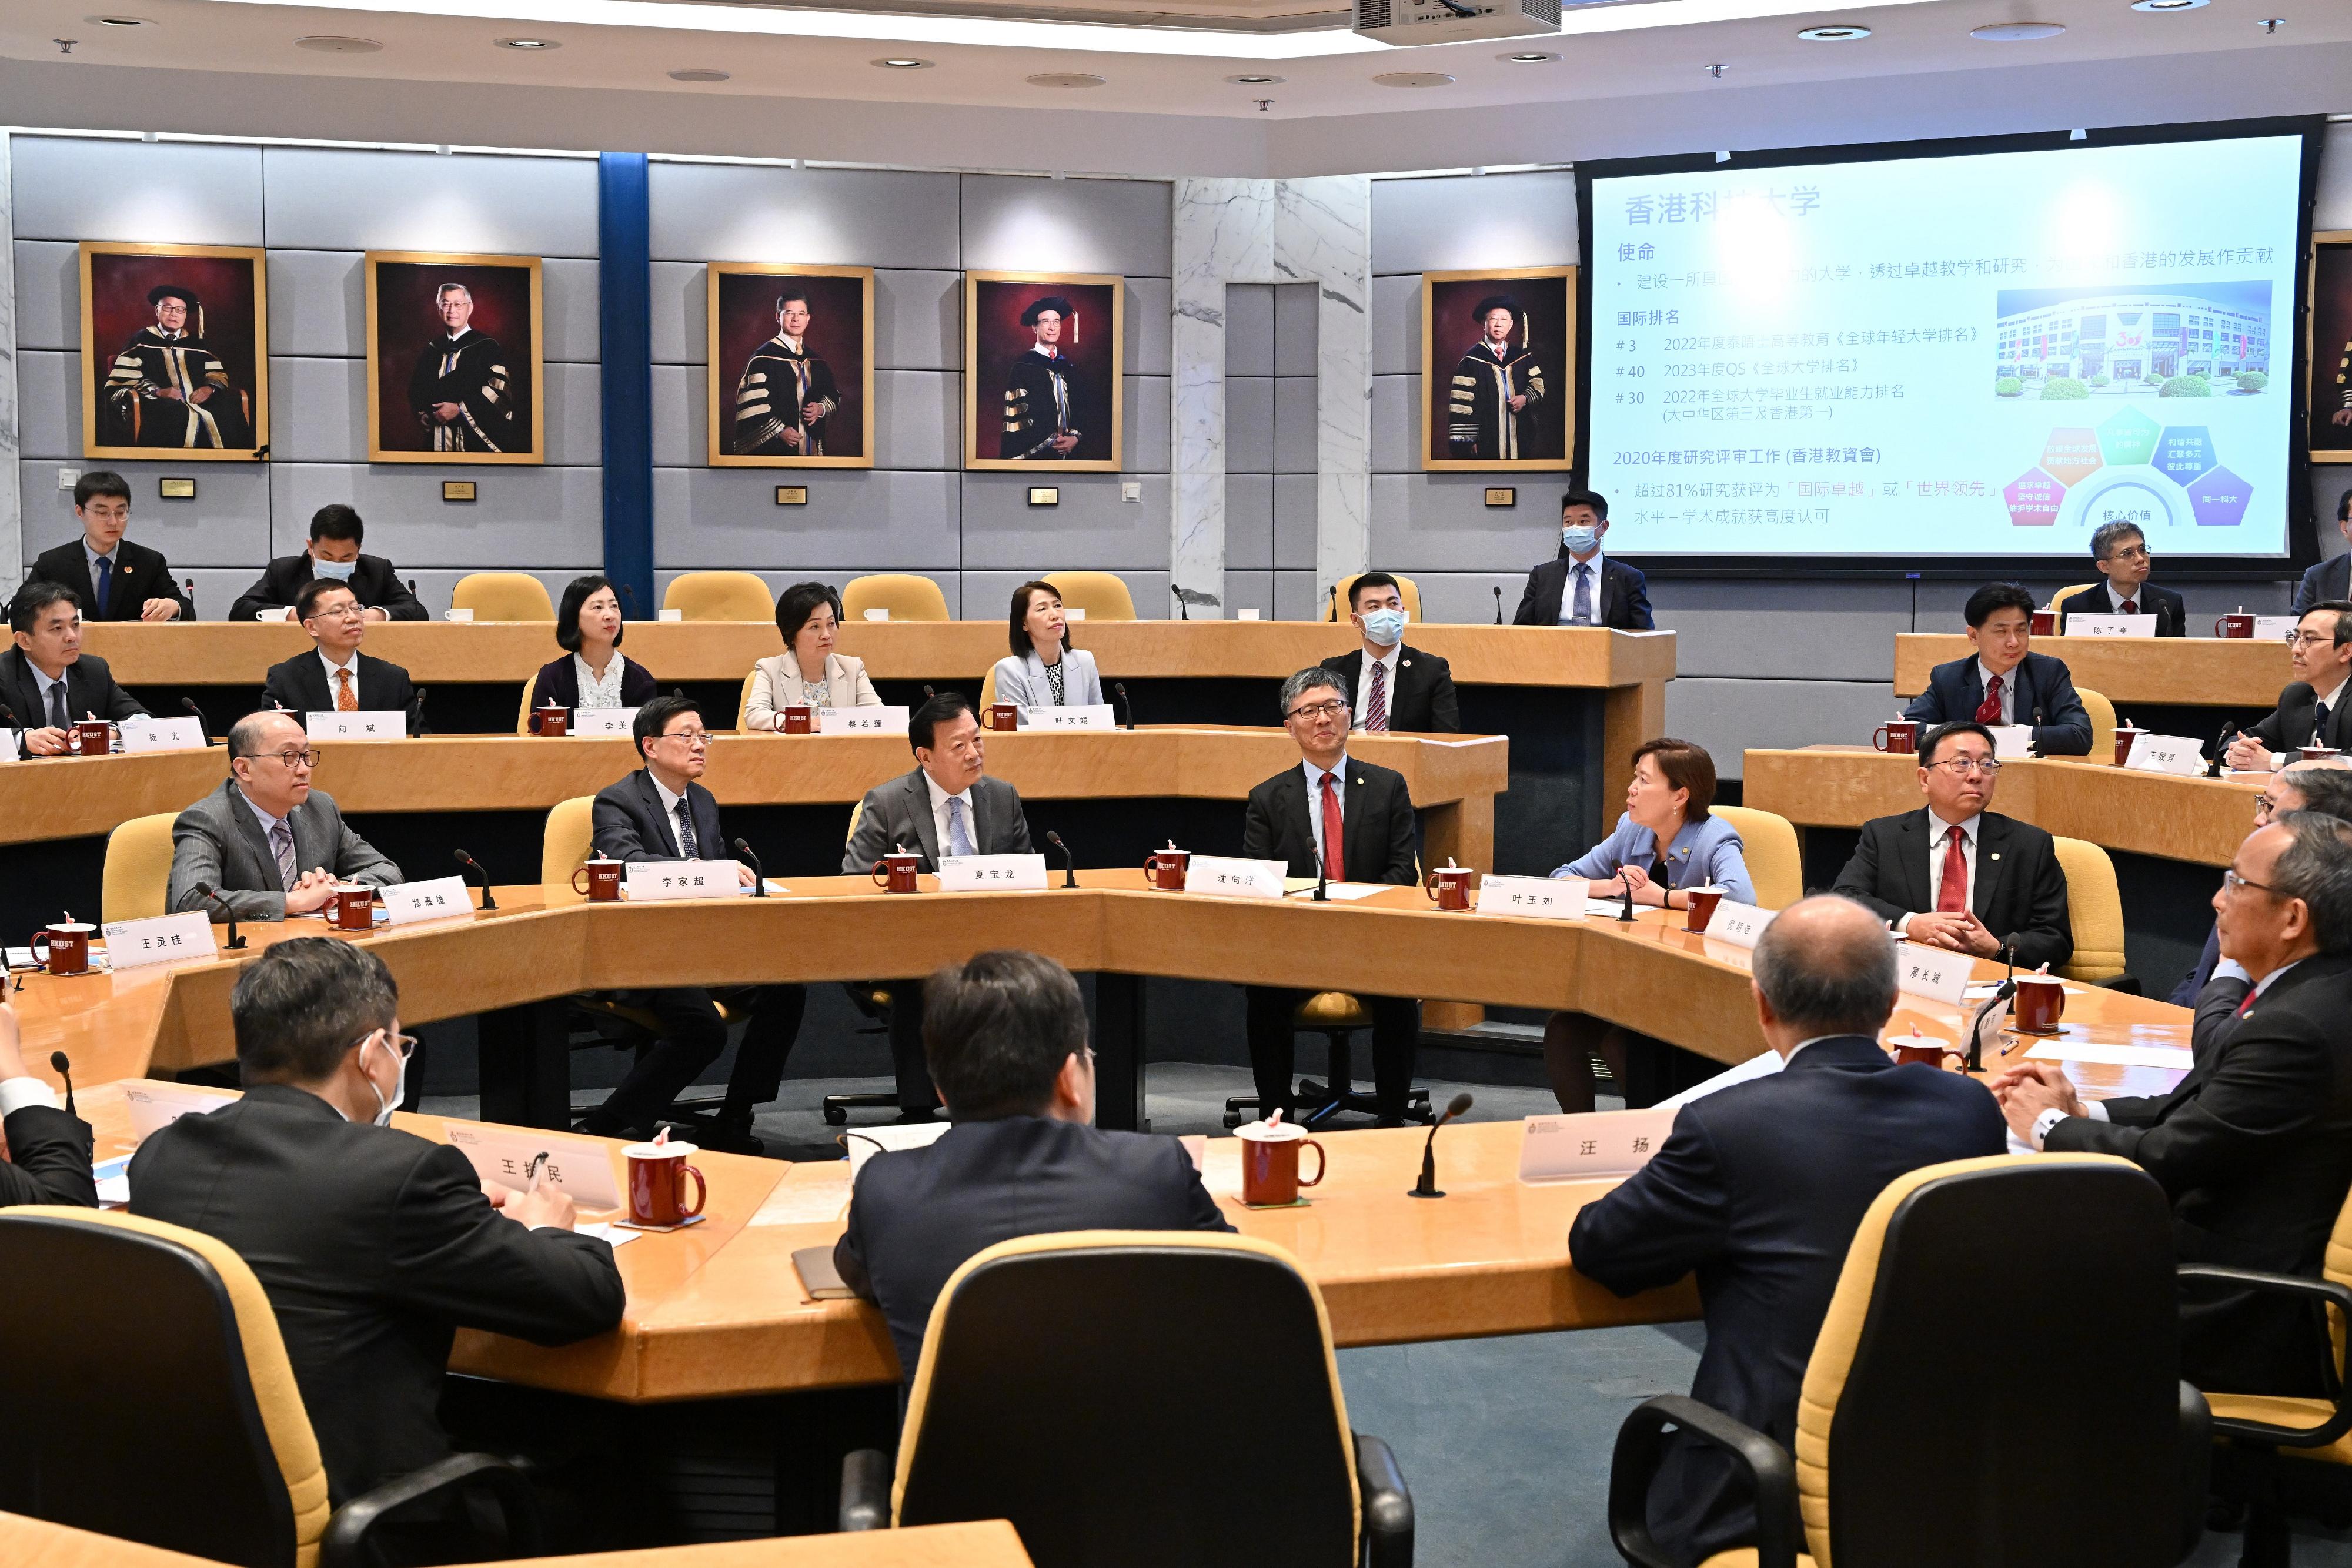 Accompanied by Chief Executive Mr. John LEE and Secretary for Education Dr. CHOI Yuk-lin, Director XIA Baolong was briefed by HKUST Council Chairman Prof. Harry SHUM and President Prof. Nancy IP, on the development strategy of the university.